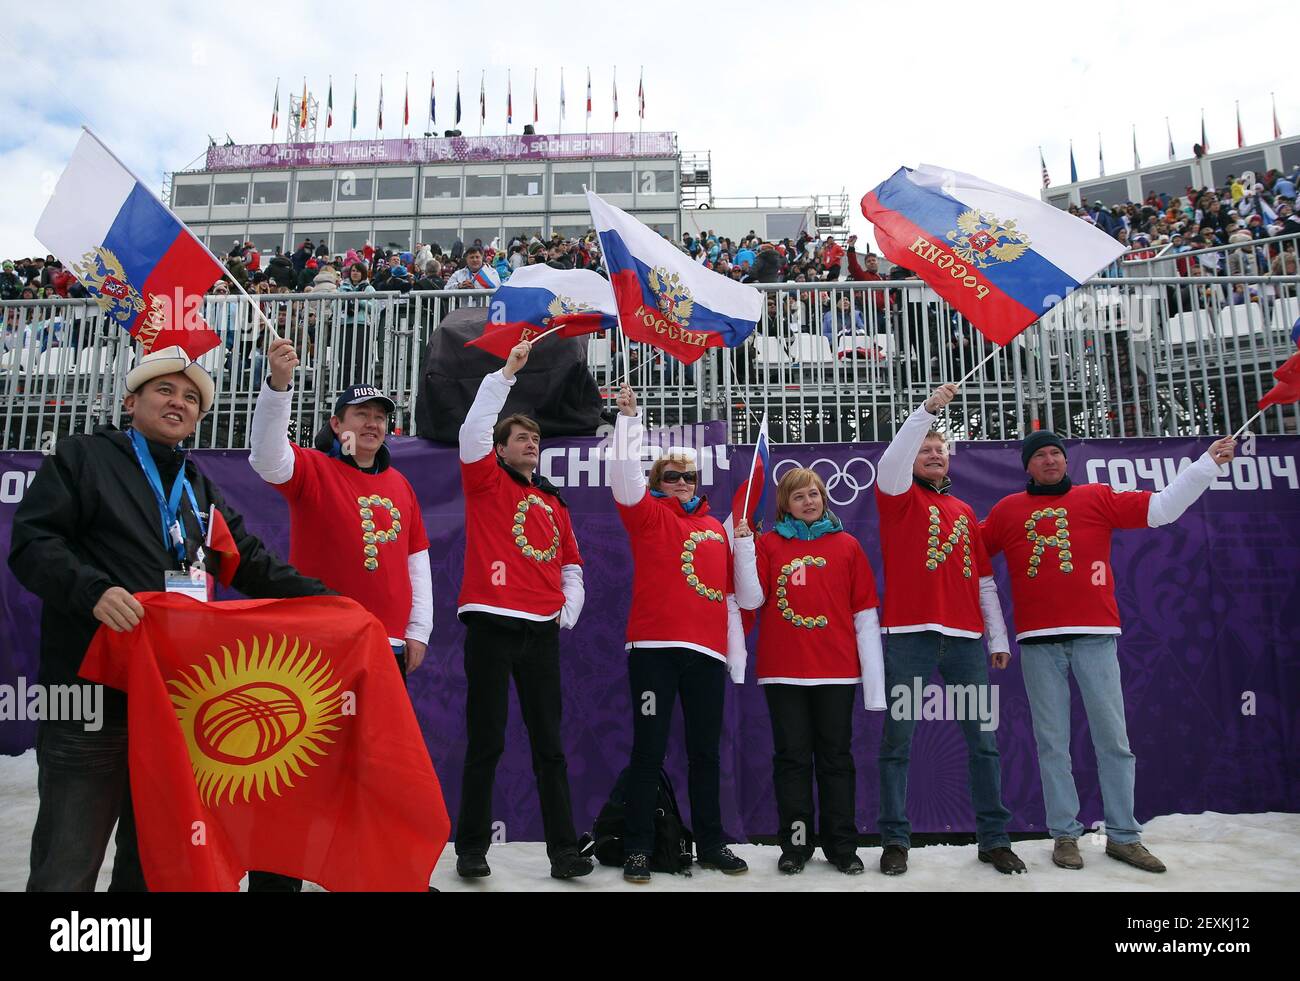 Fans of Russia cheer during the ladies' ski slopestyle at the Rosa Khutor Extreme Park during the Winter Olympics in Sochi, Russia, Tuesday, Feb. 11, 2014. (Photo by Brian Cassella/Chicago Tribune/MCT/Sipa USA) Stock Photo